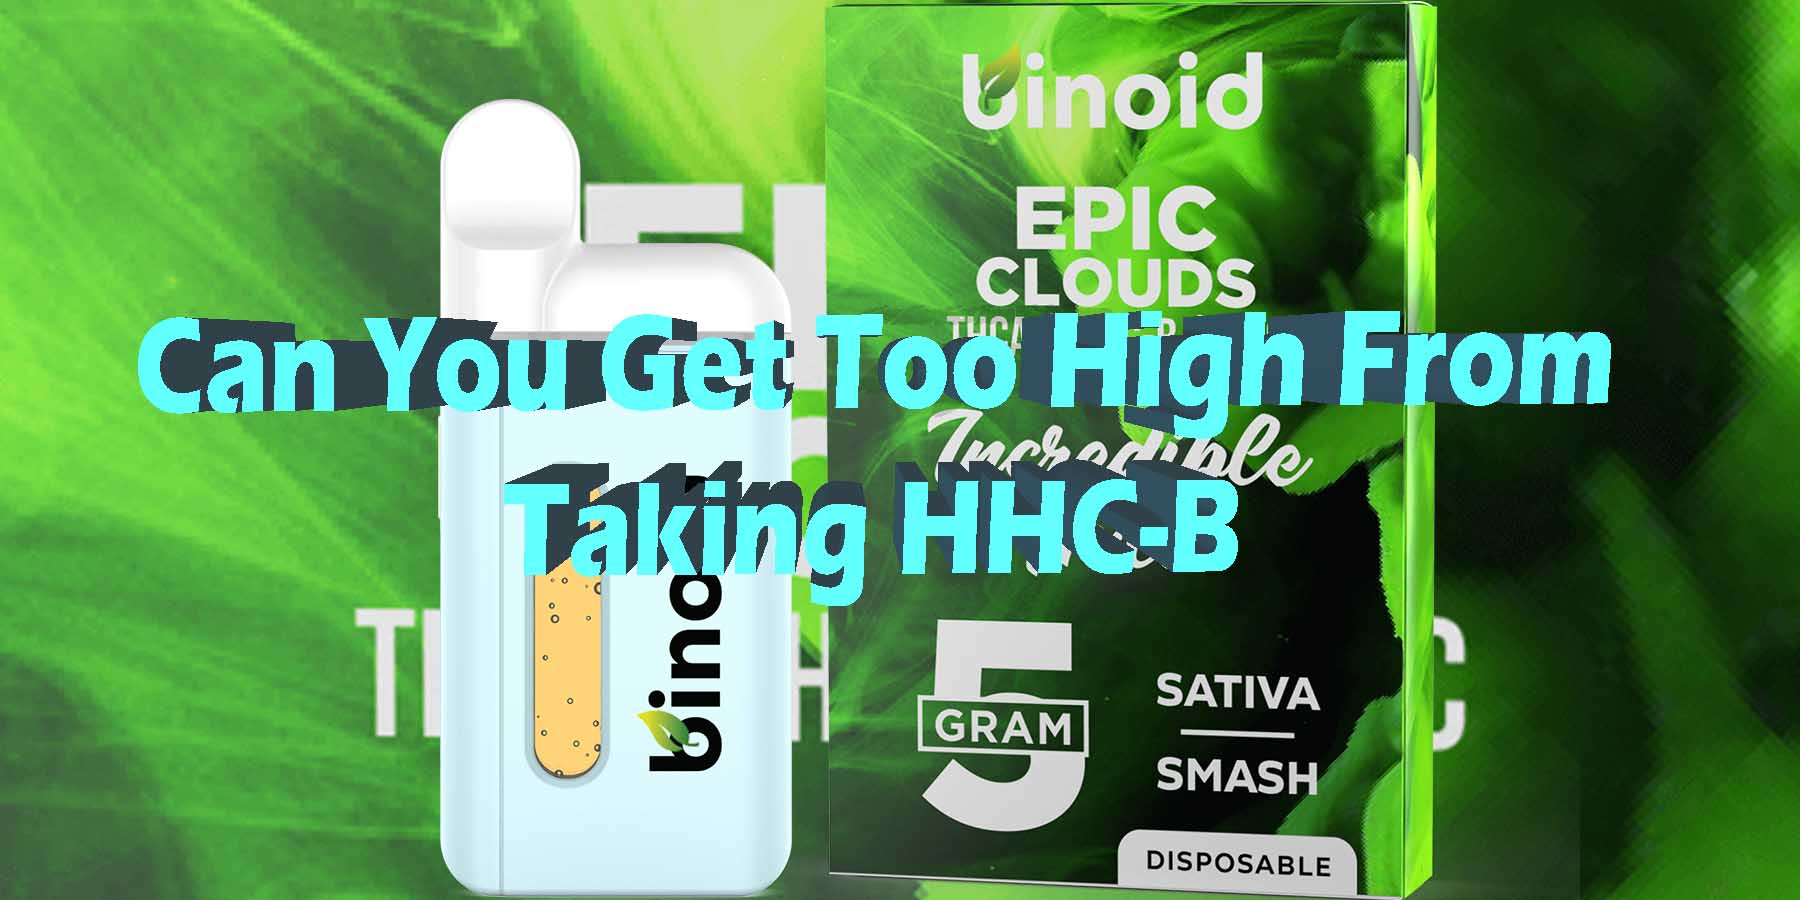 Can You Get Too High From Taking HHC-B HowToBuyNearMe BestSmokeBrand LowestPrice Coupon Discount StrongestBrand BestBrand